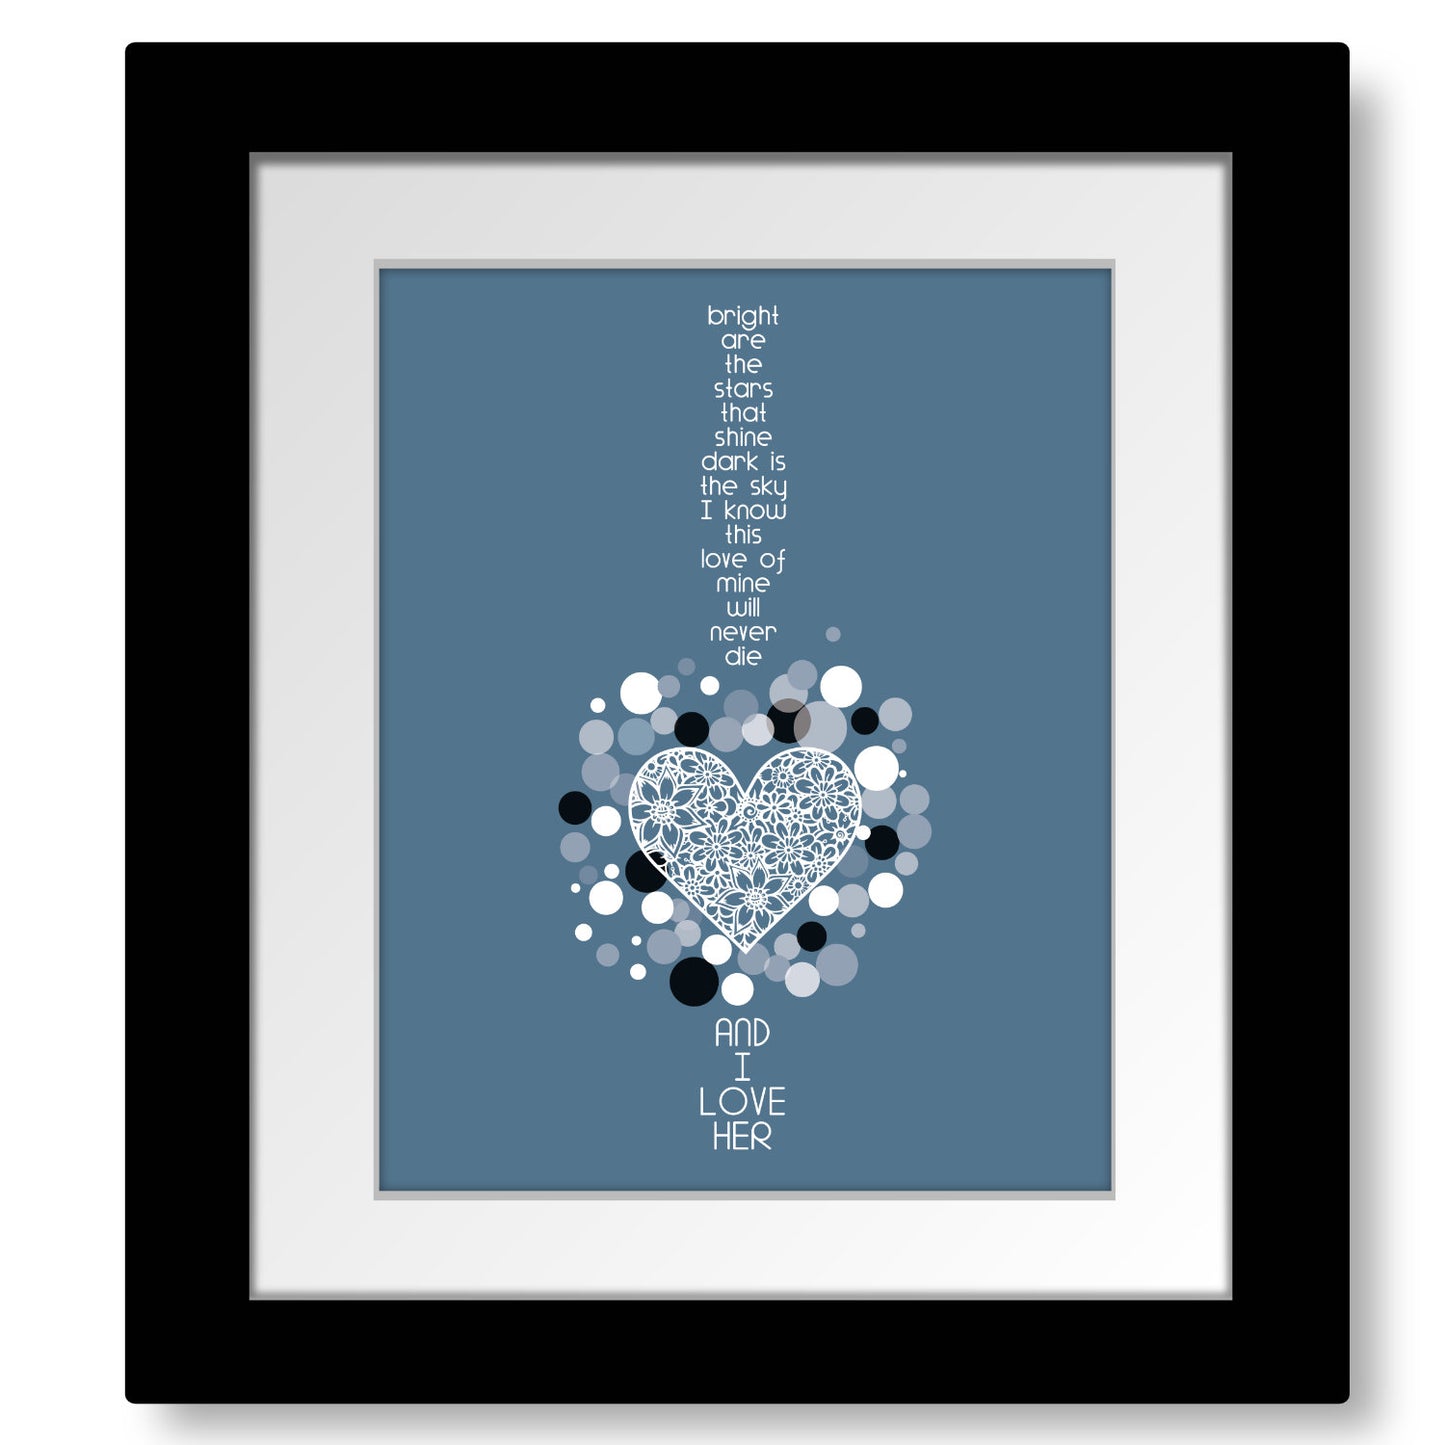 And I Love Her by the Beatles - Song Lyrics Wedding Art